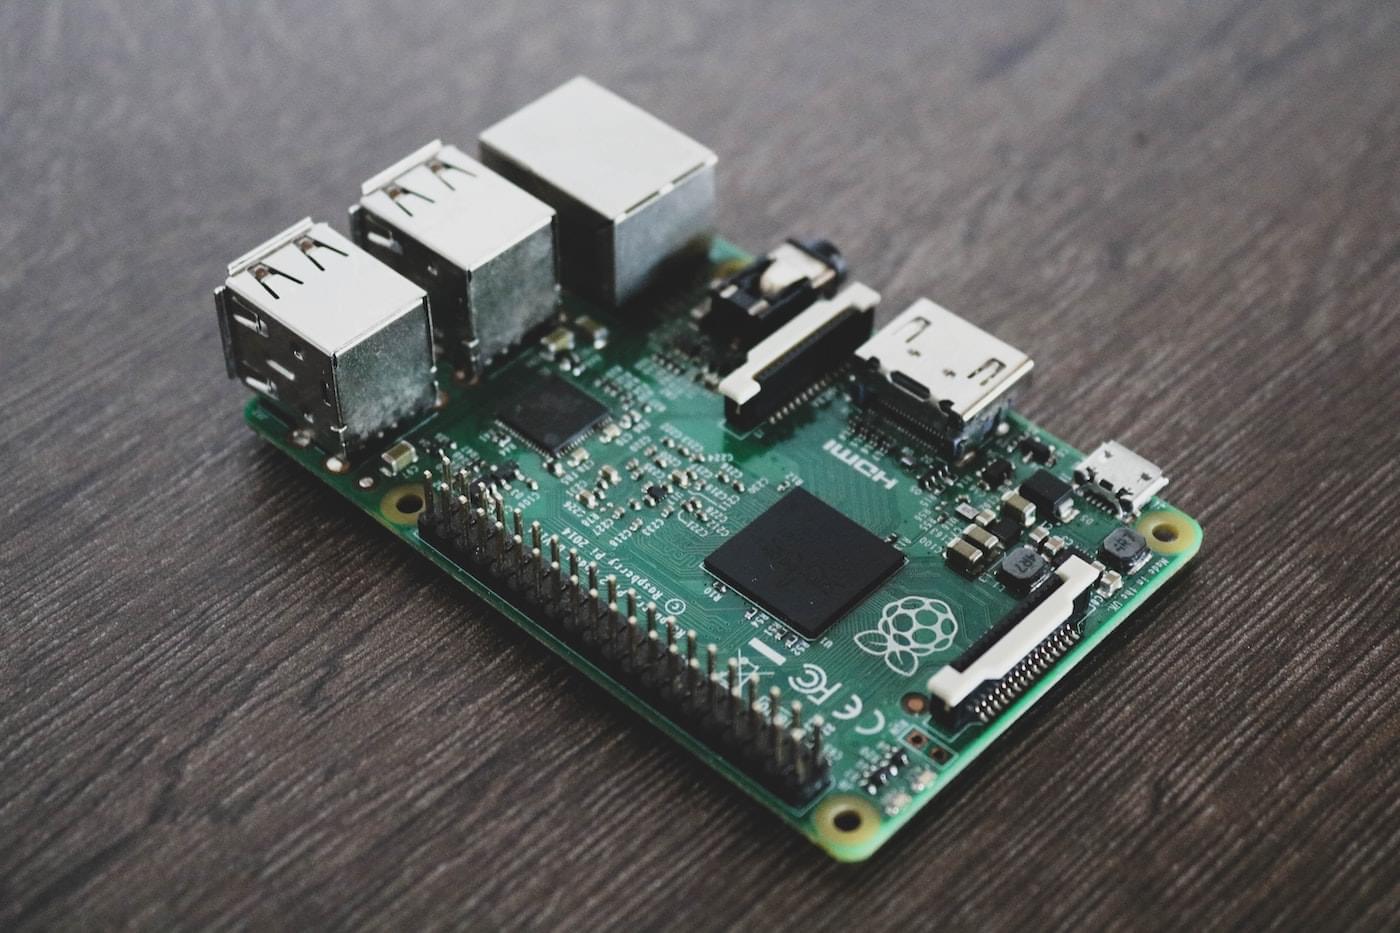 simple computers like this raspberry pi could power the IOT.